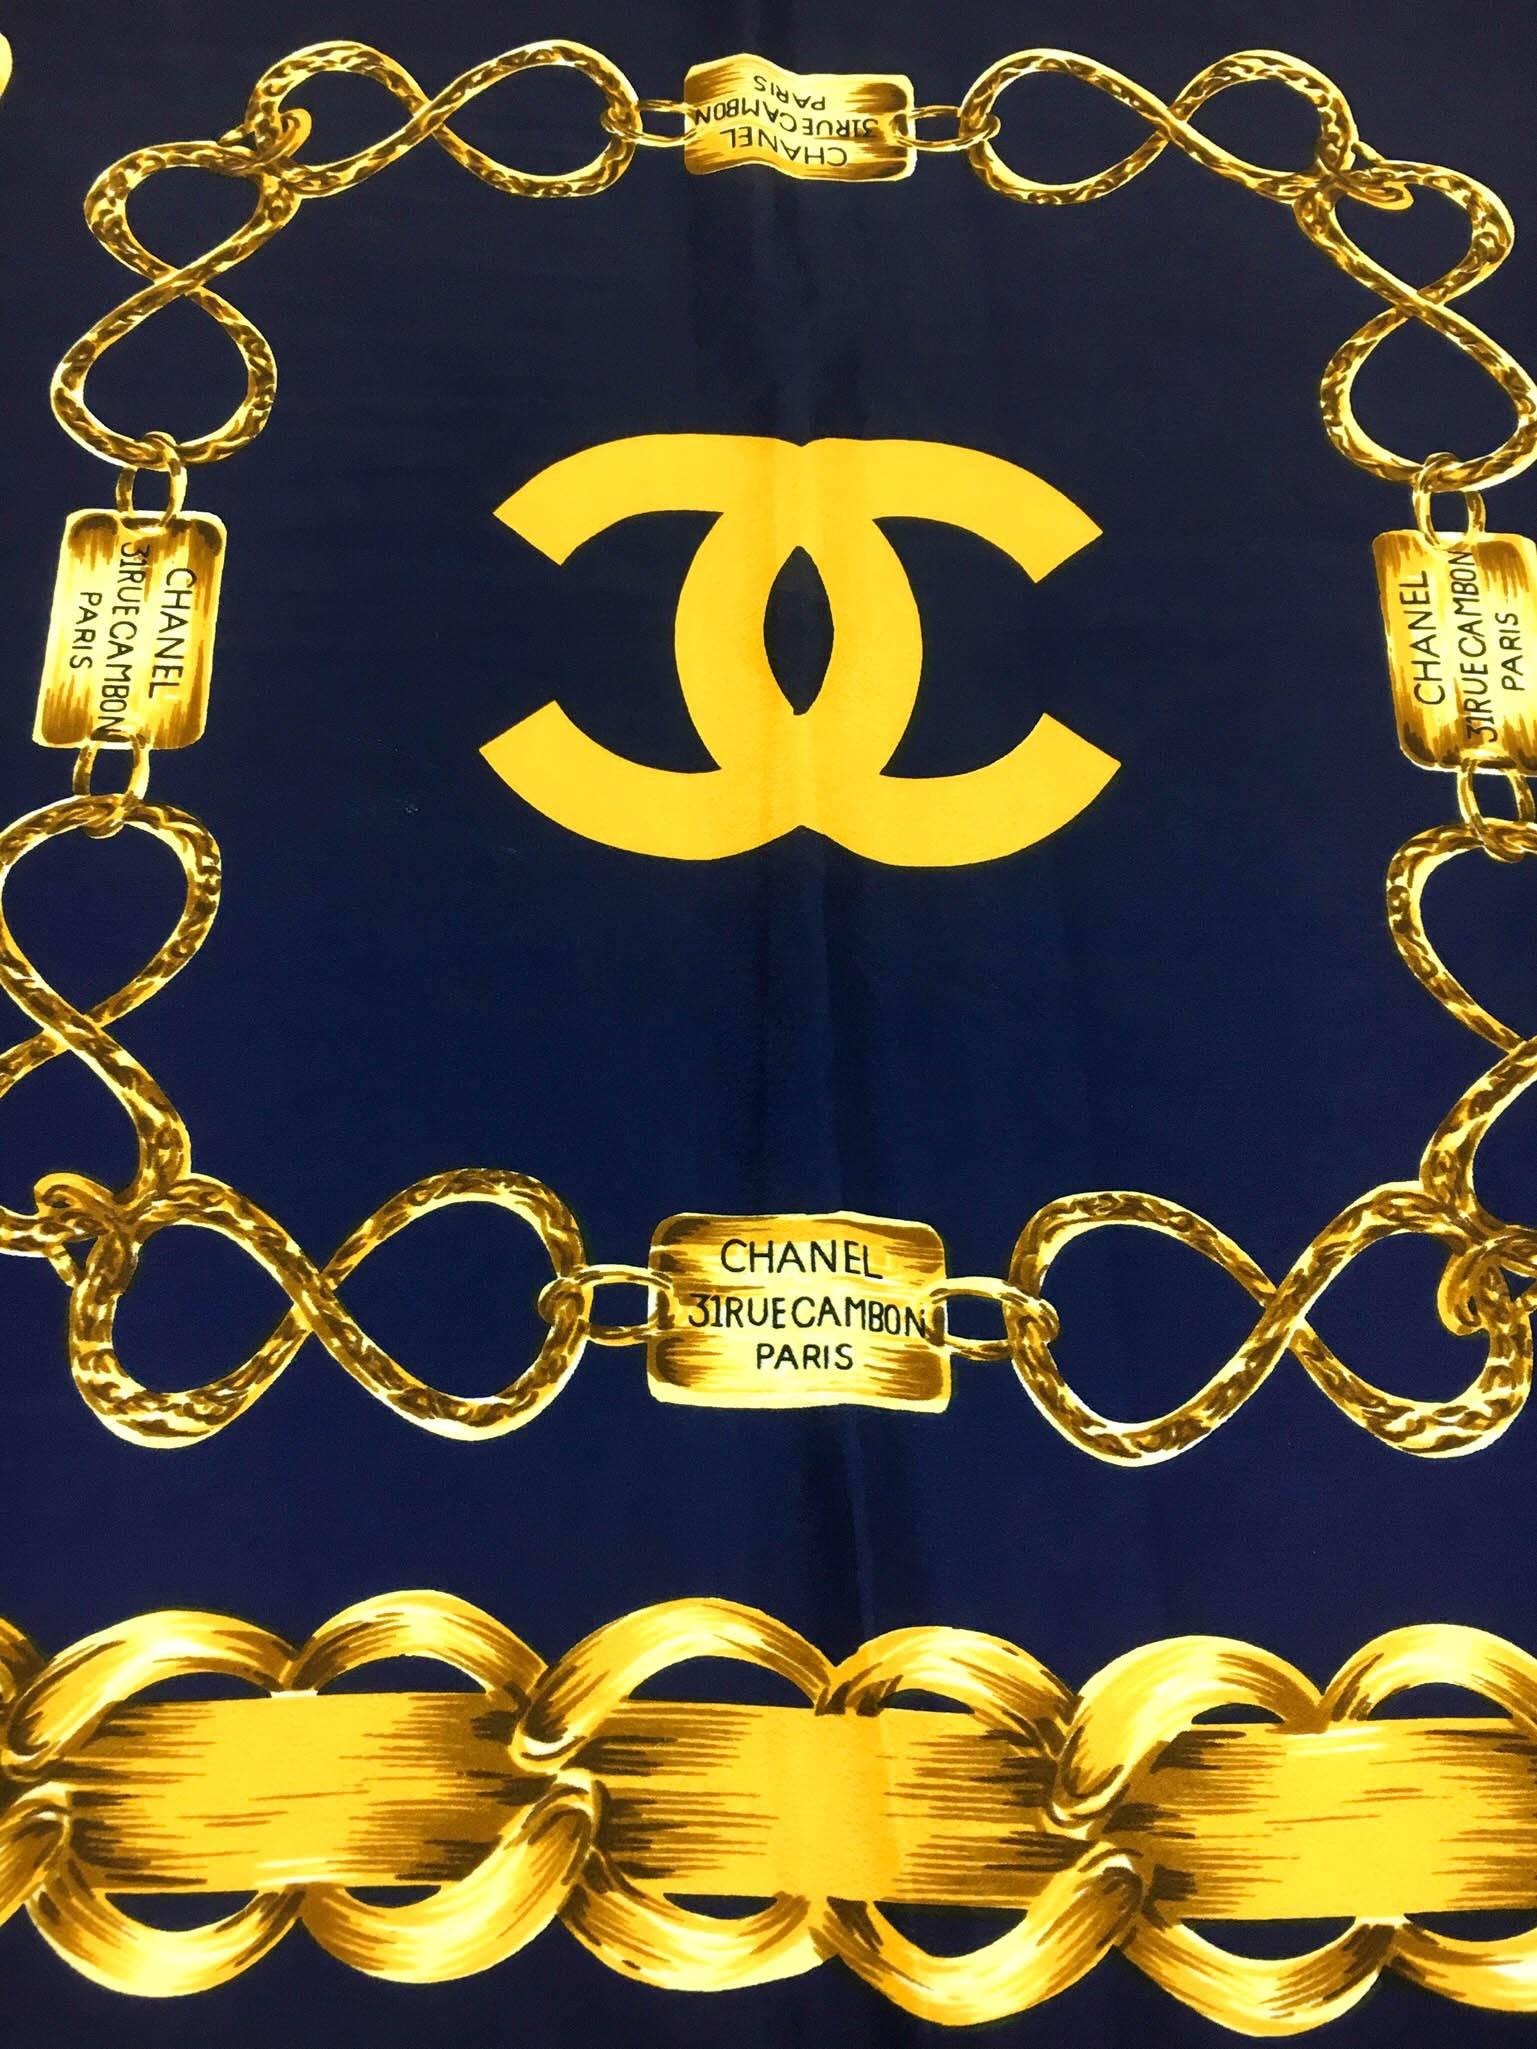 Gorgeous Vintage Chanel Scarf. This beautiful Chanel scarf is made in pure silk and dates back from the 1990s. In navy blue and golden, it features various designs of chains (an ever recurring motif at Chanel), 4 medallions, 8 plaques saying Chanel,